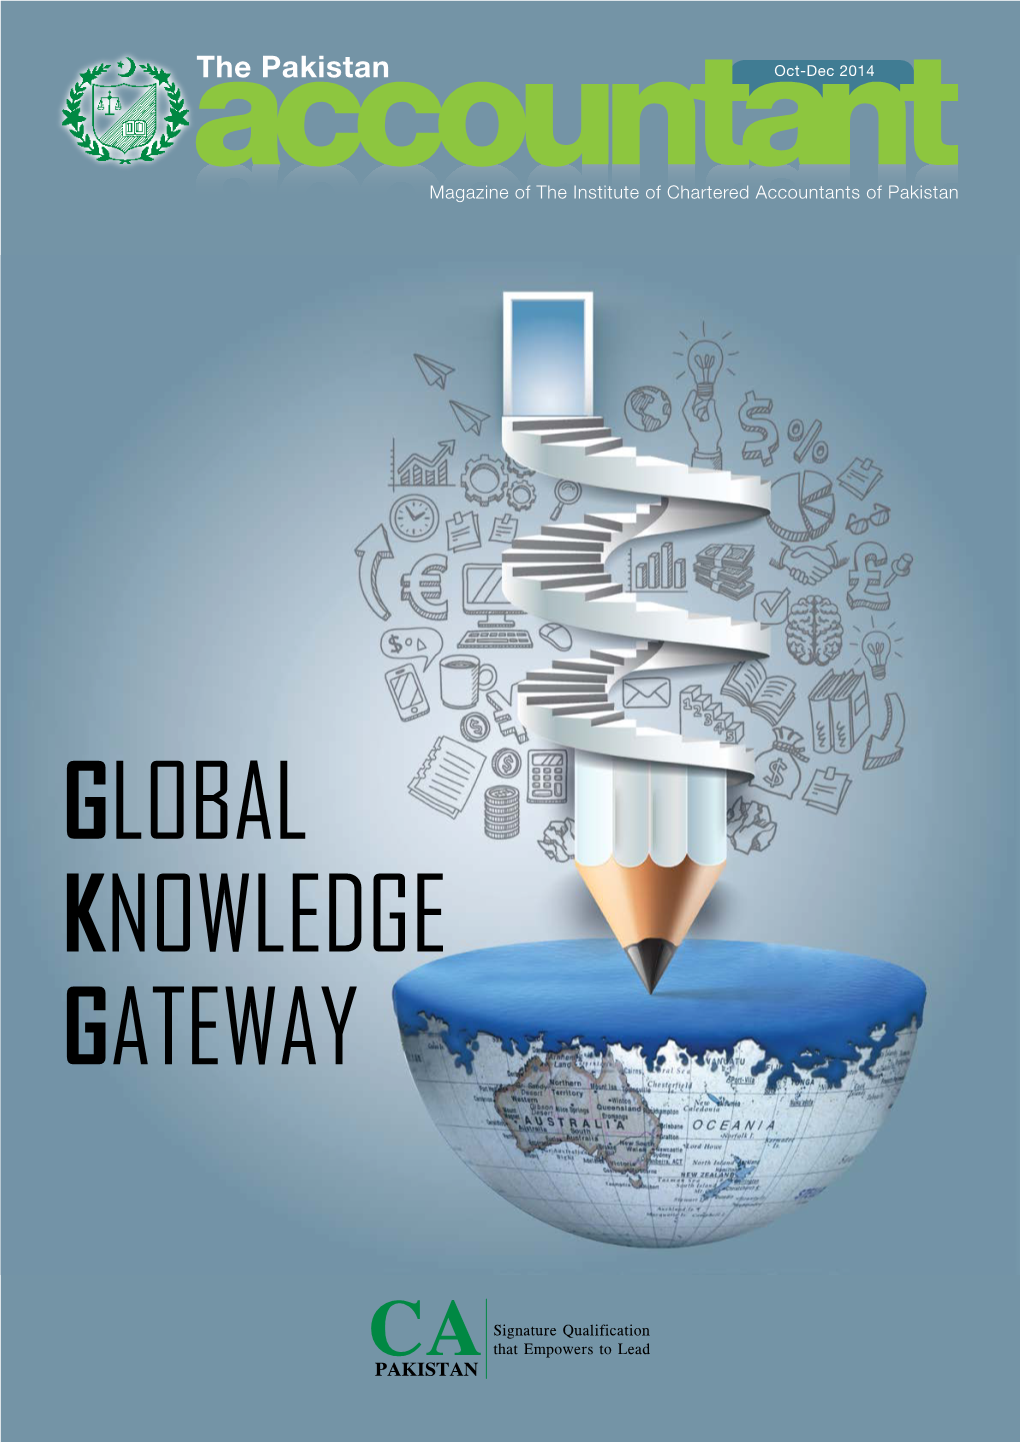 GLOBAL KNOWLEDGE GATEWAY Be a Part of the Pakistan Accountant Team…